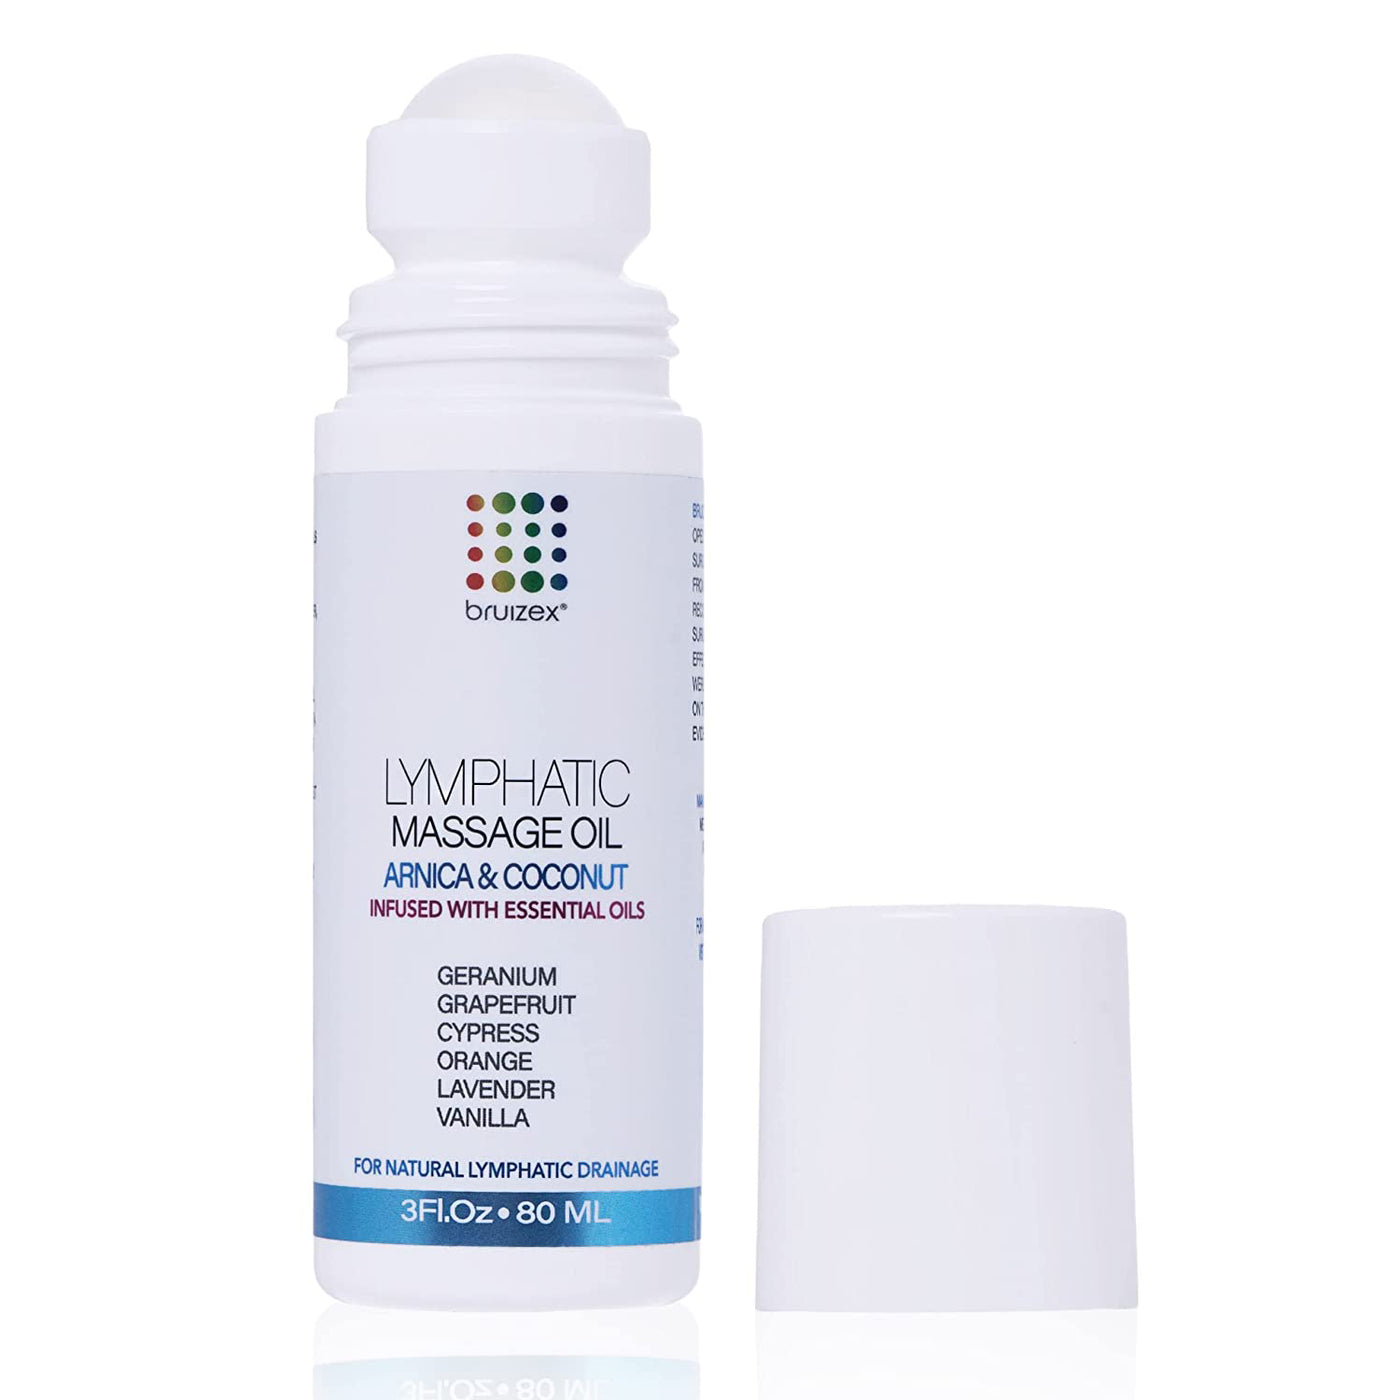 Lymphatic Massage Oil with Massager